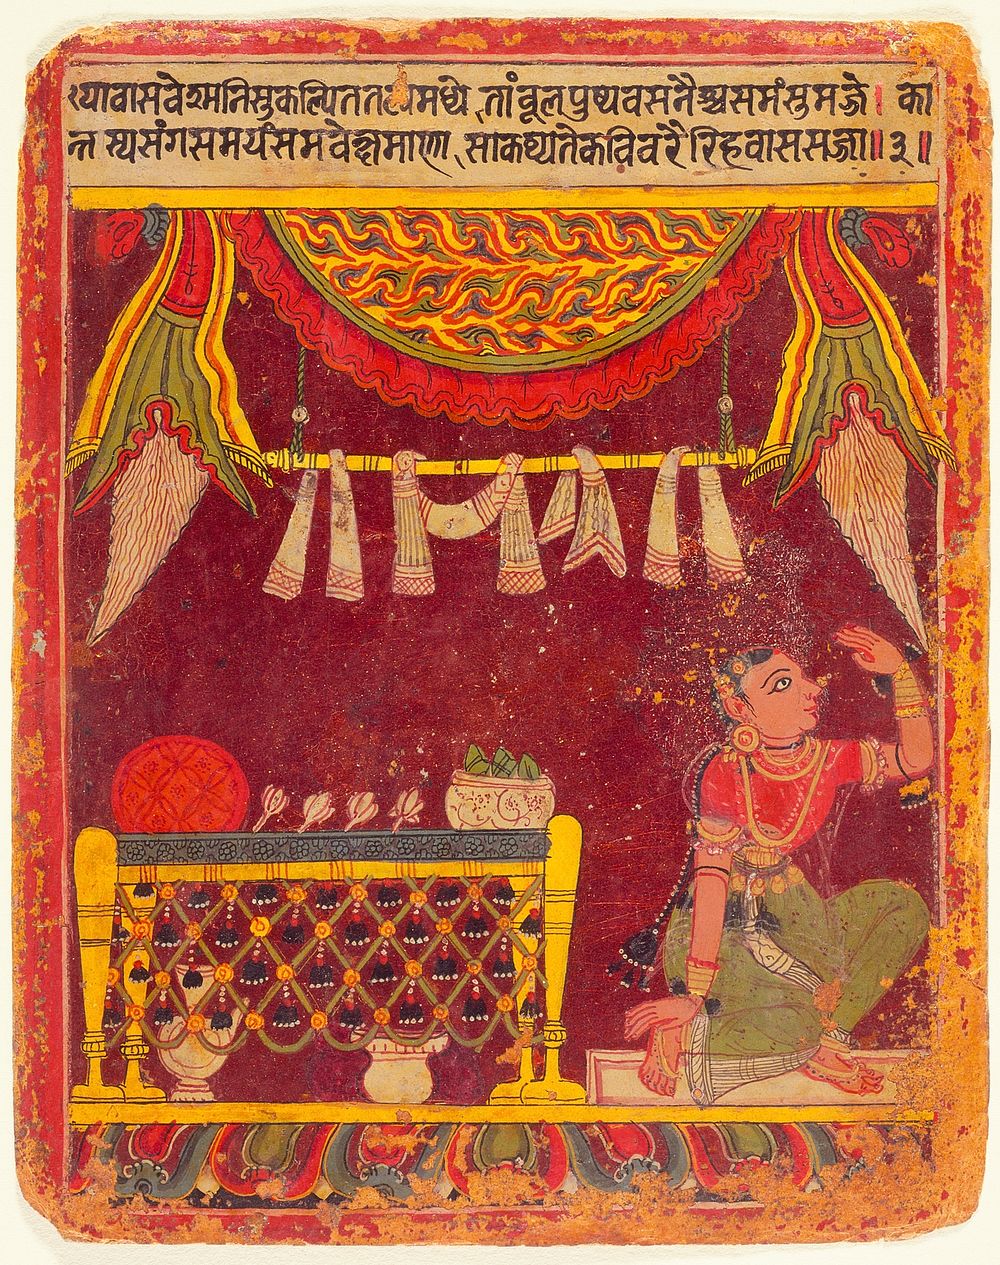 Expectant Heroine (Vasasajja), Nayika Painting Appended to a Ragamala (Garland of Melodies)